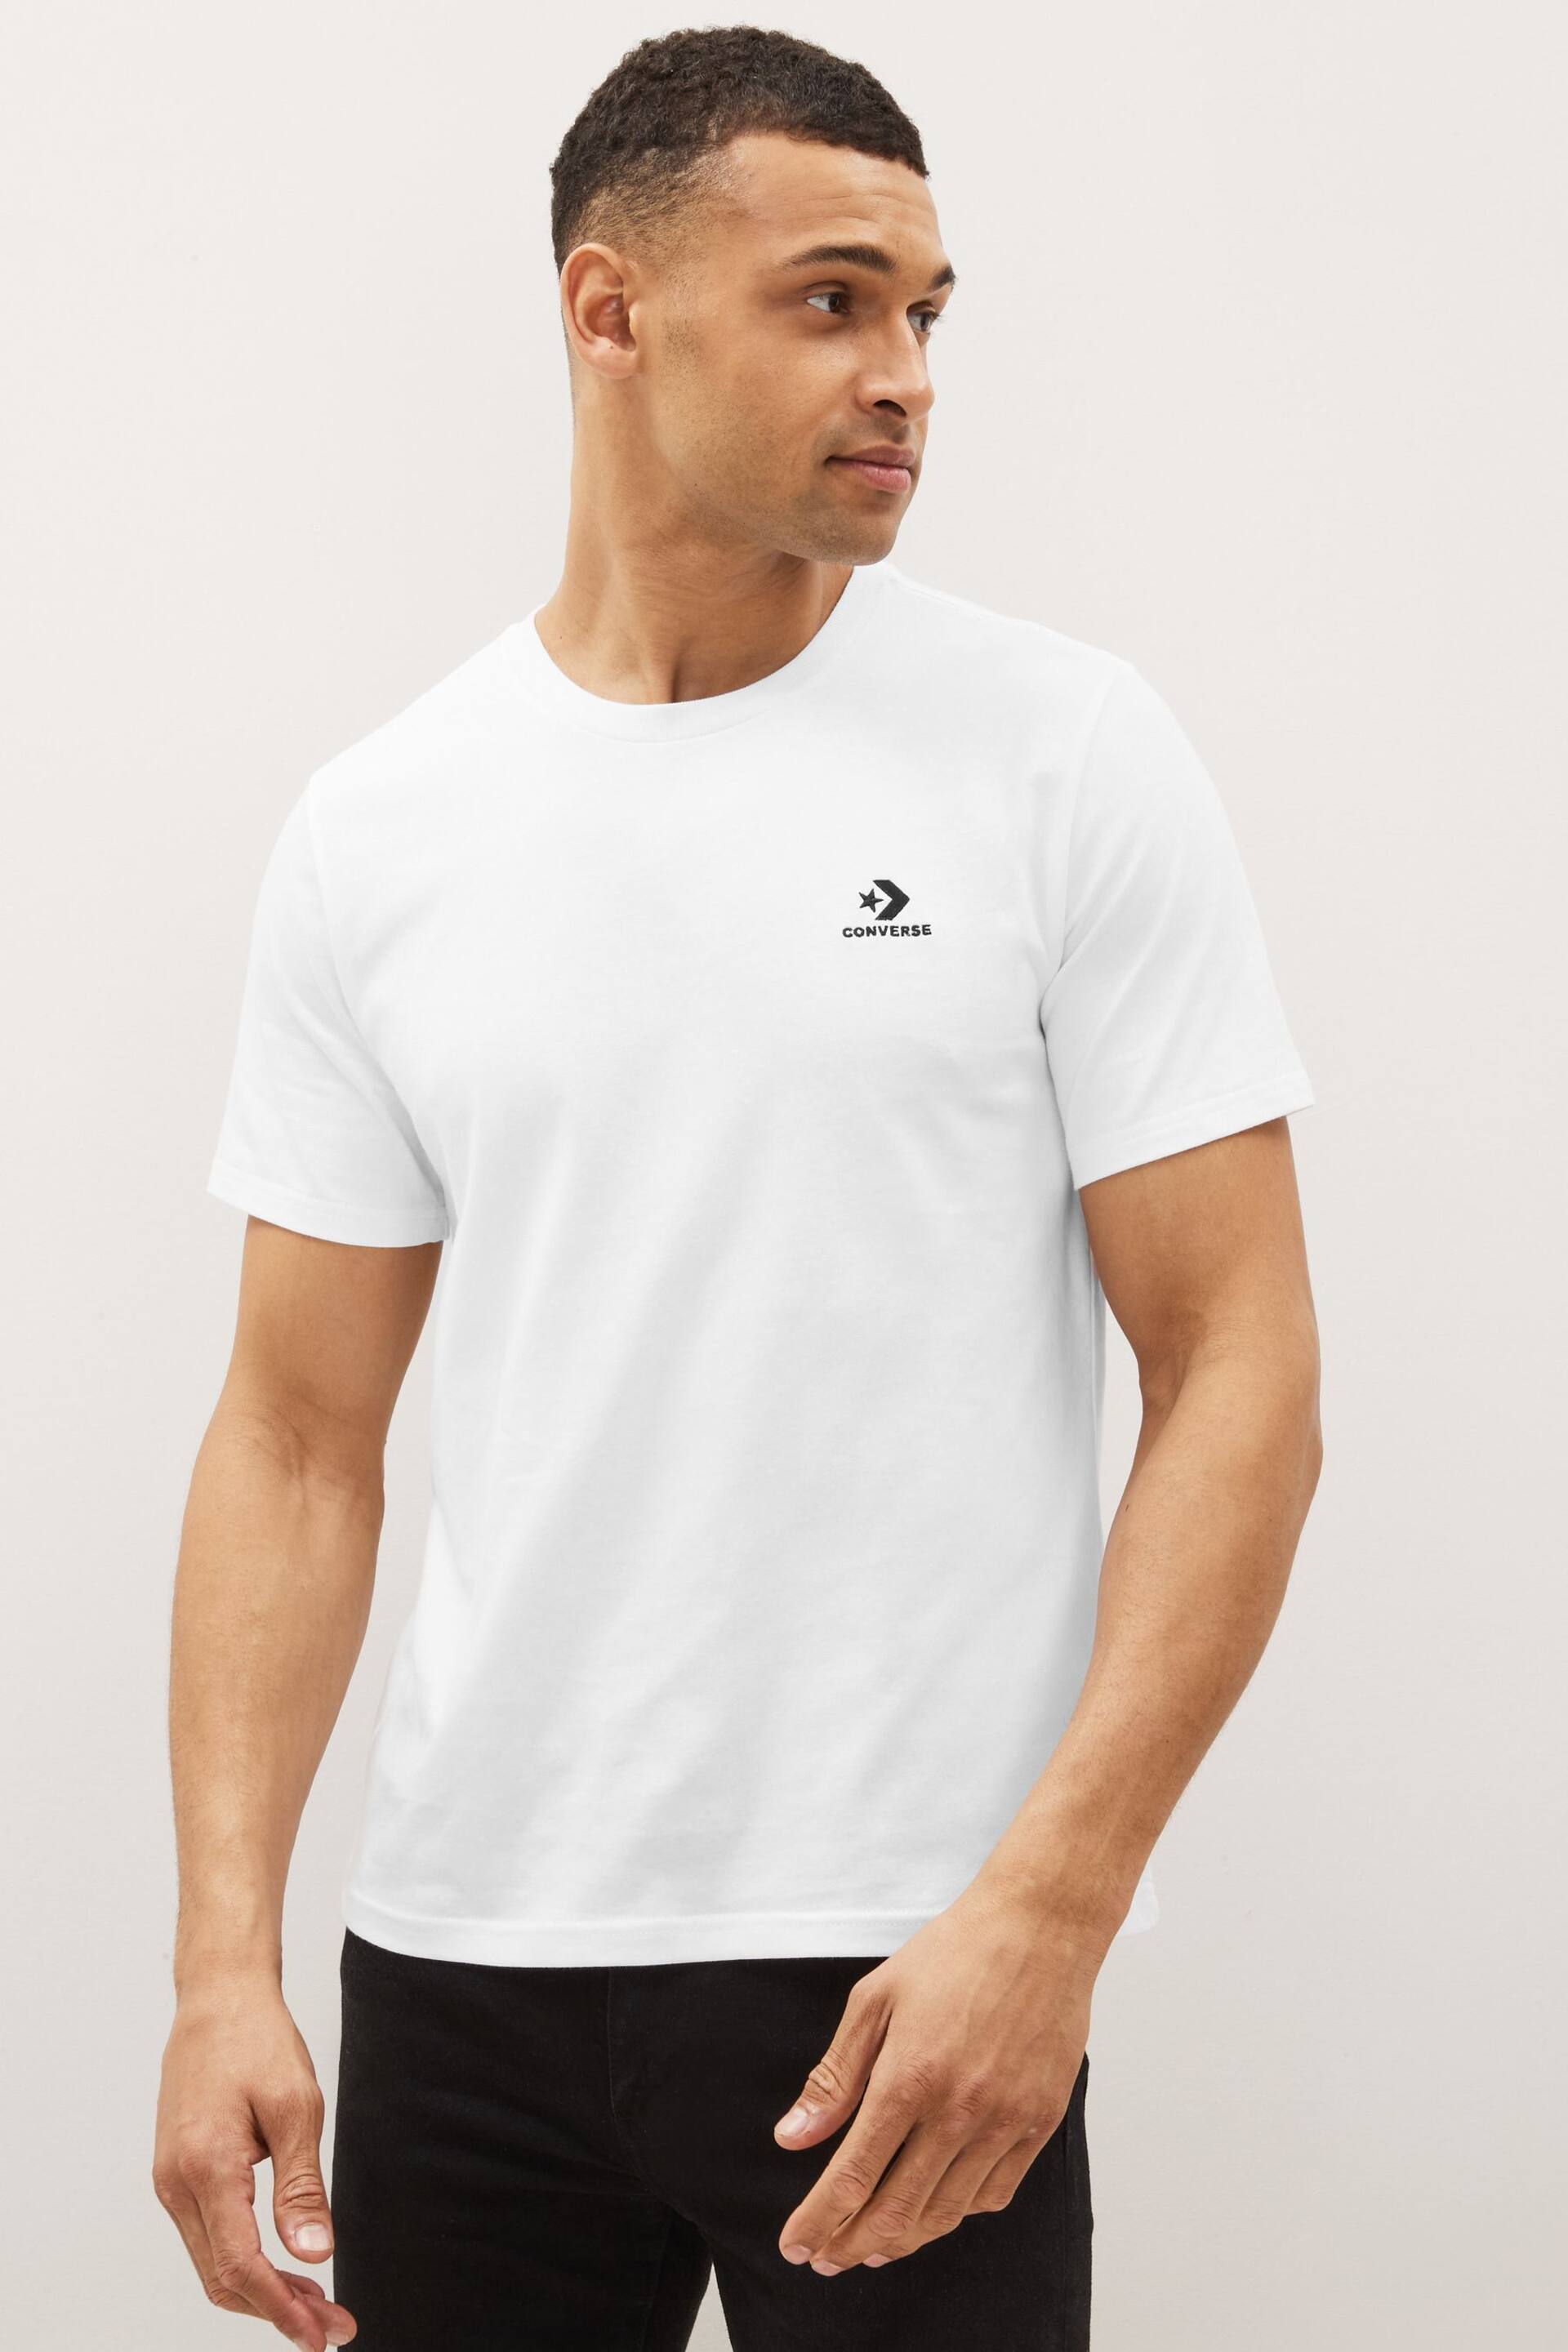 Converse White Classic T-Shirt - Image 1 of 4